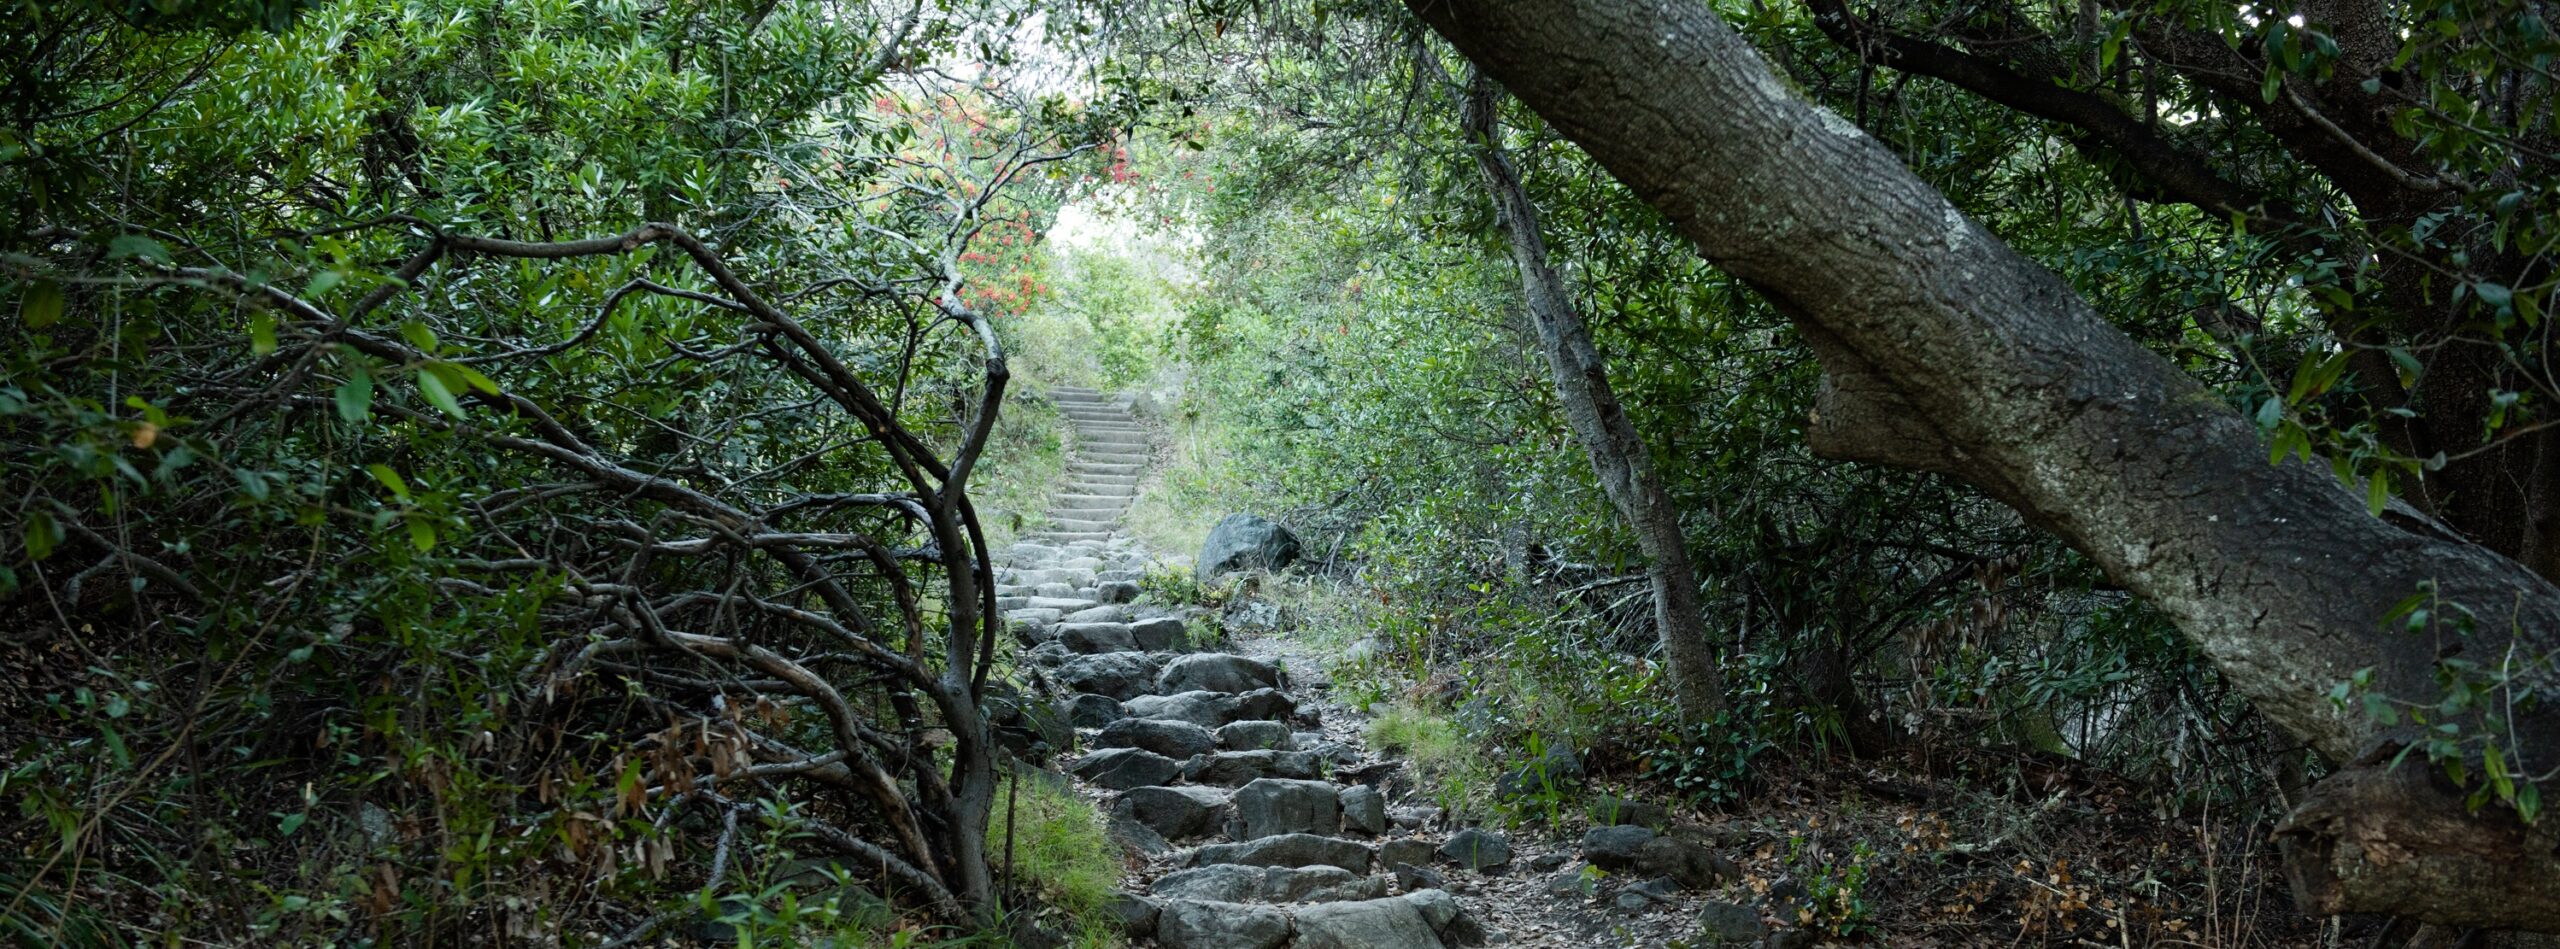 A hill in a forest with a flight of stone steps going to the bright area at the top